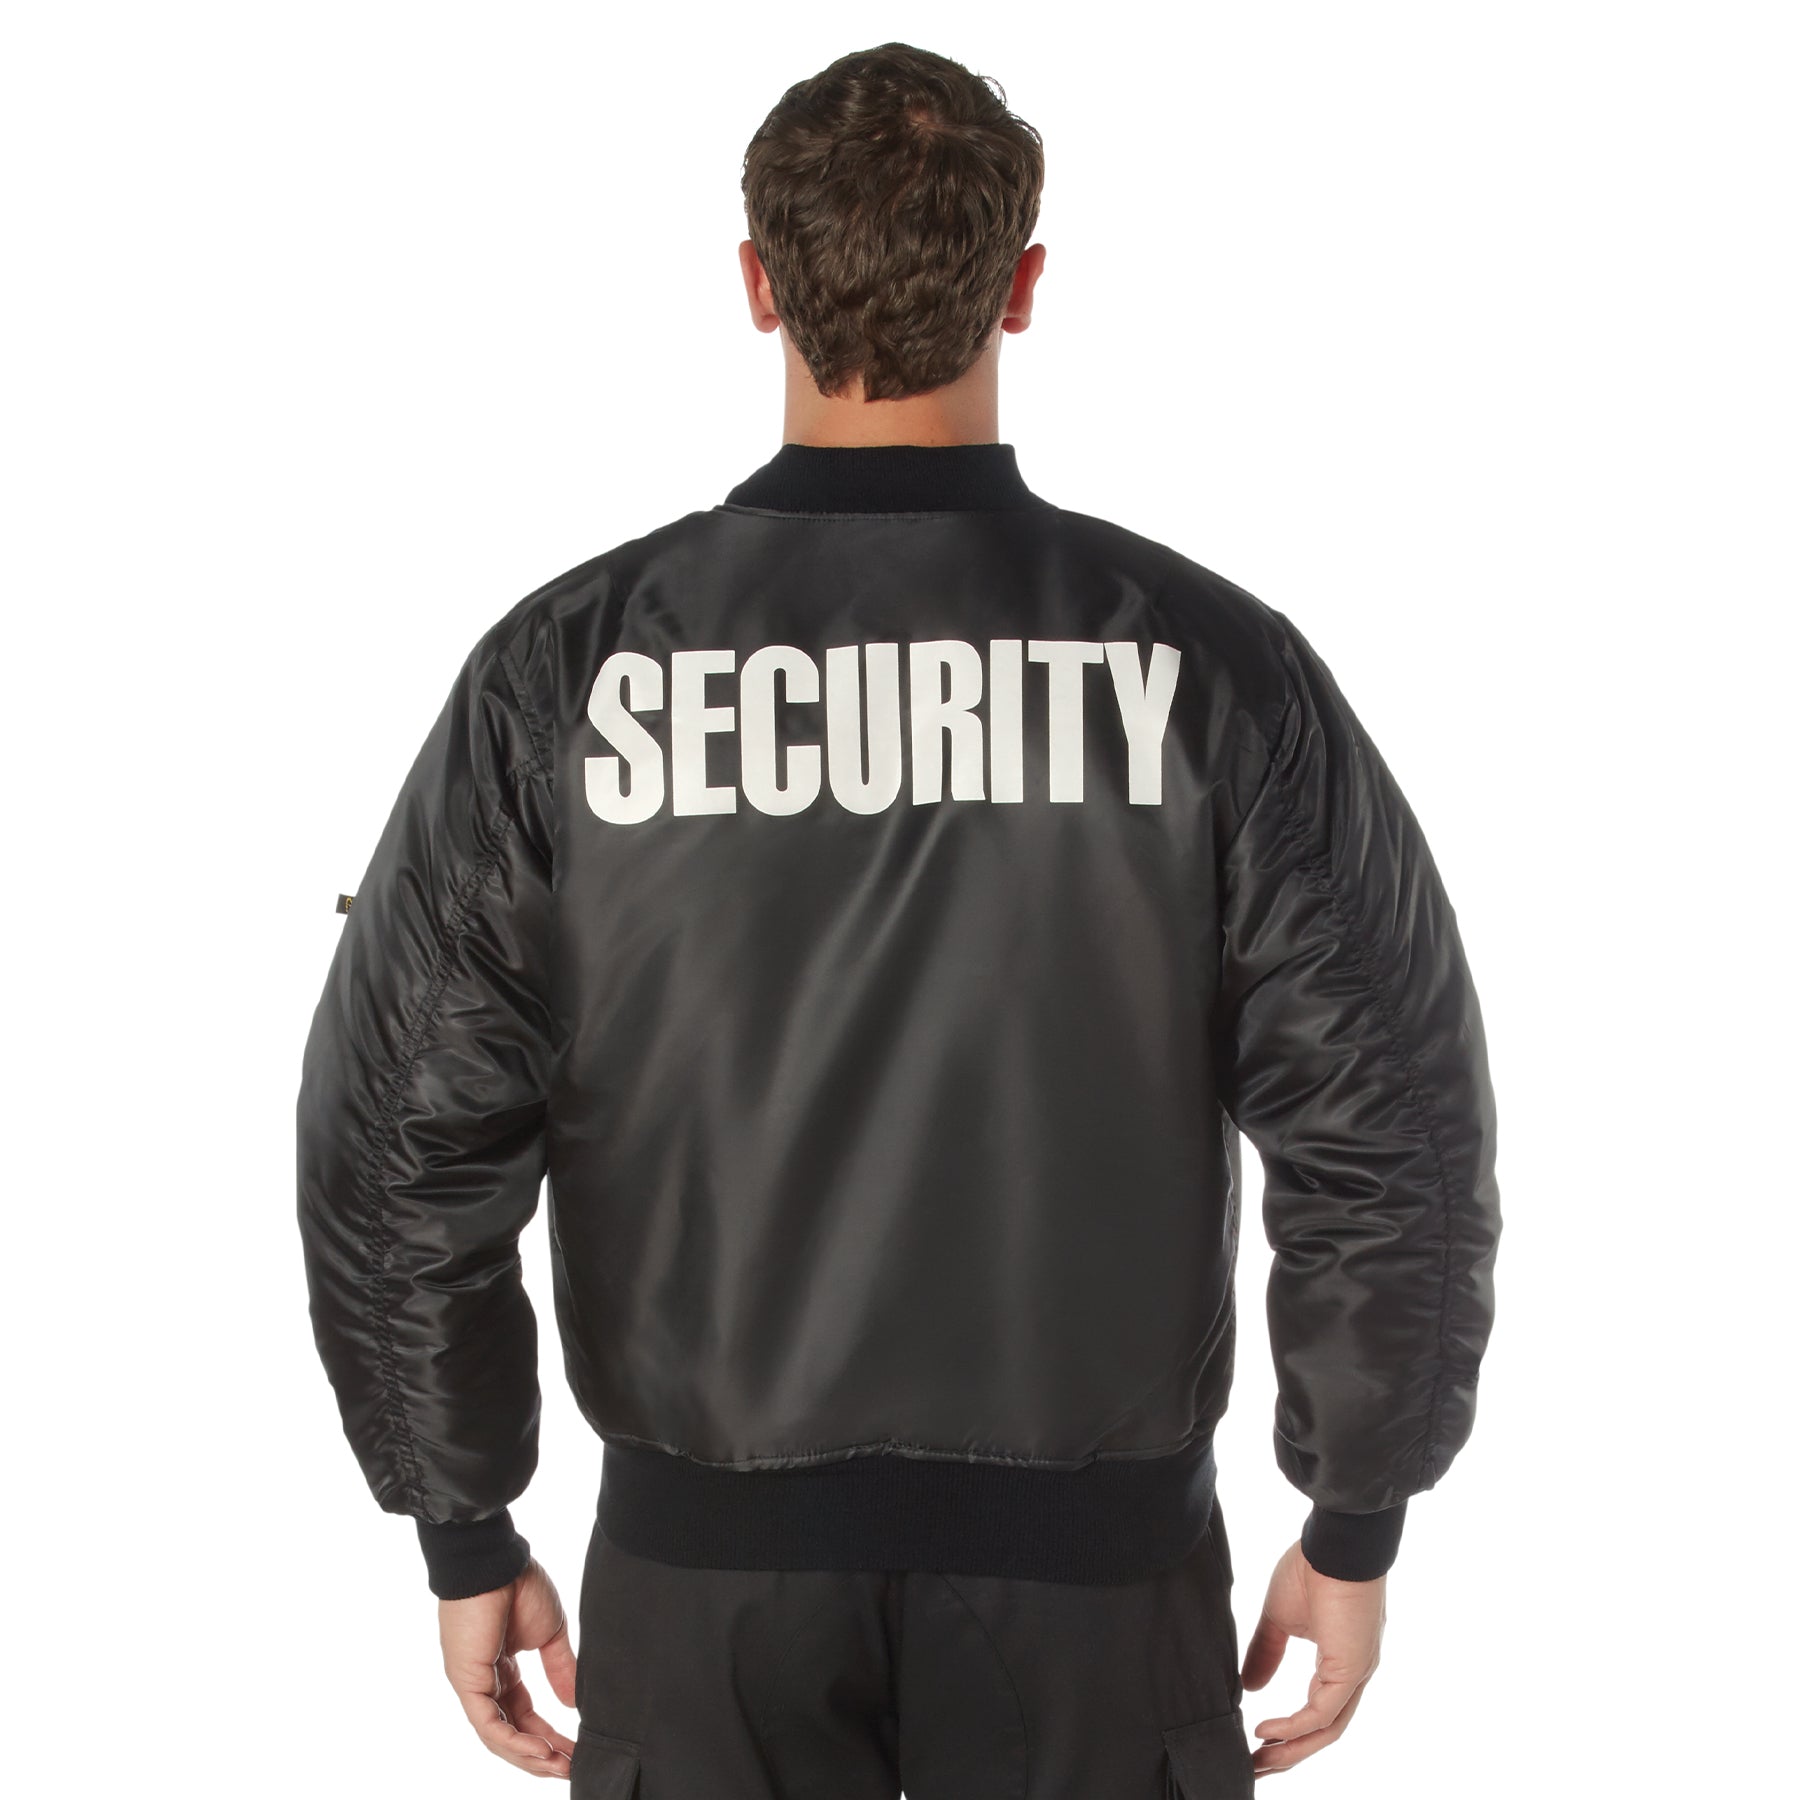 MA-1 Flight Jacket With Security Print - Tactical Choice Plus